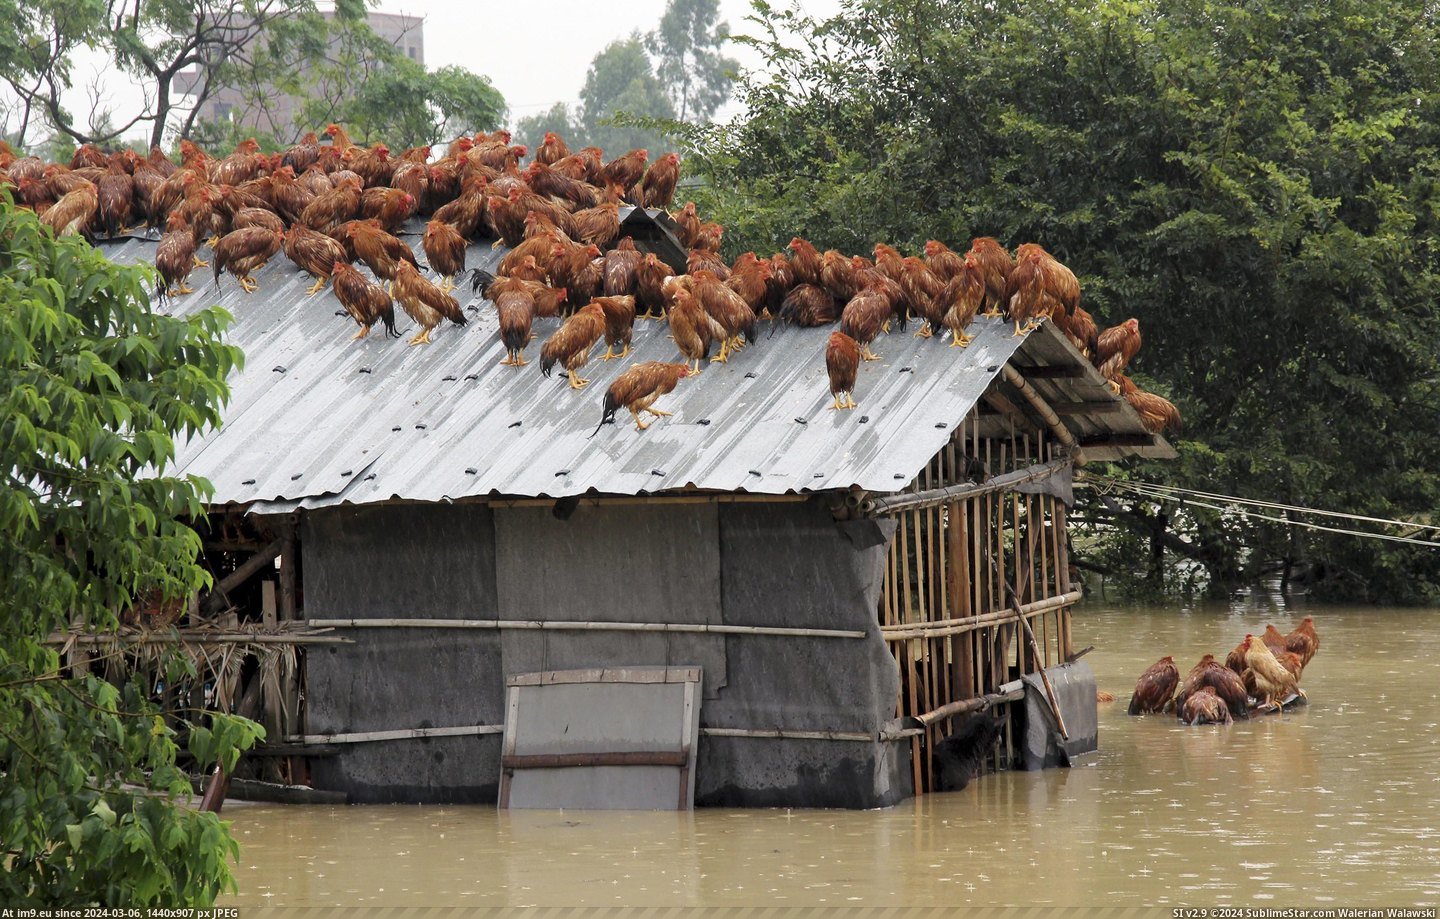 #Roof  #Chickens [Pics] Chickens on the roof Pic. (Изображение из альбом My r/PICS favs))